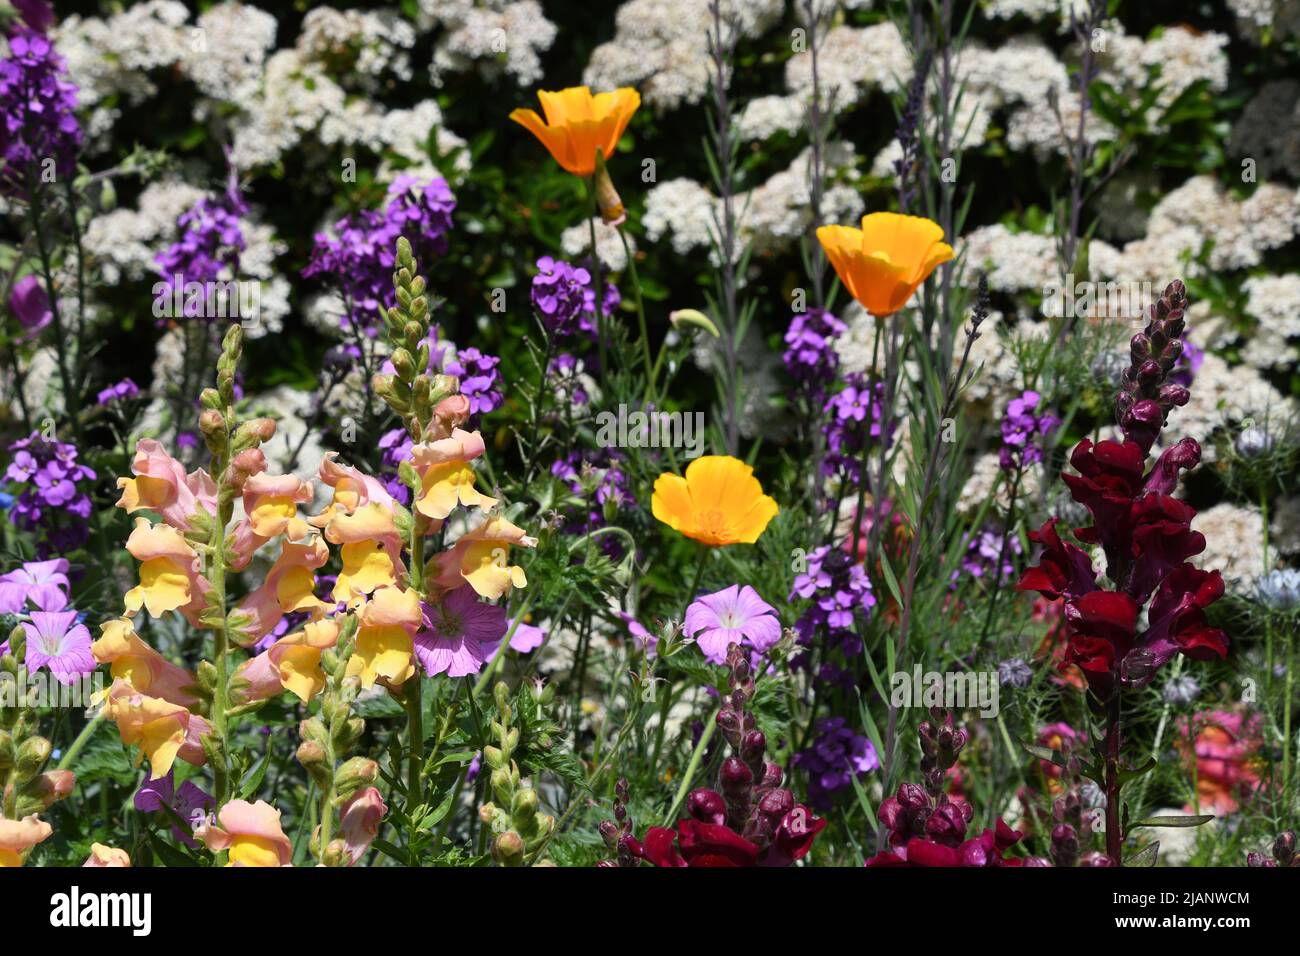 A bright colourful flower border with a mixture of golden and deep red antirrhinums,golden californian poppies,blue love-in-a-mist, nigella, erysimum, Stock Photo